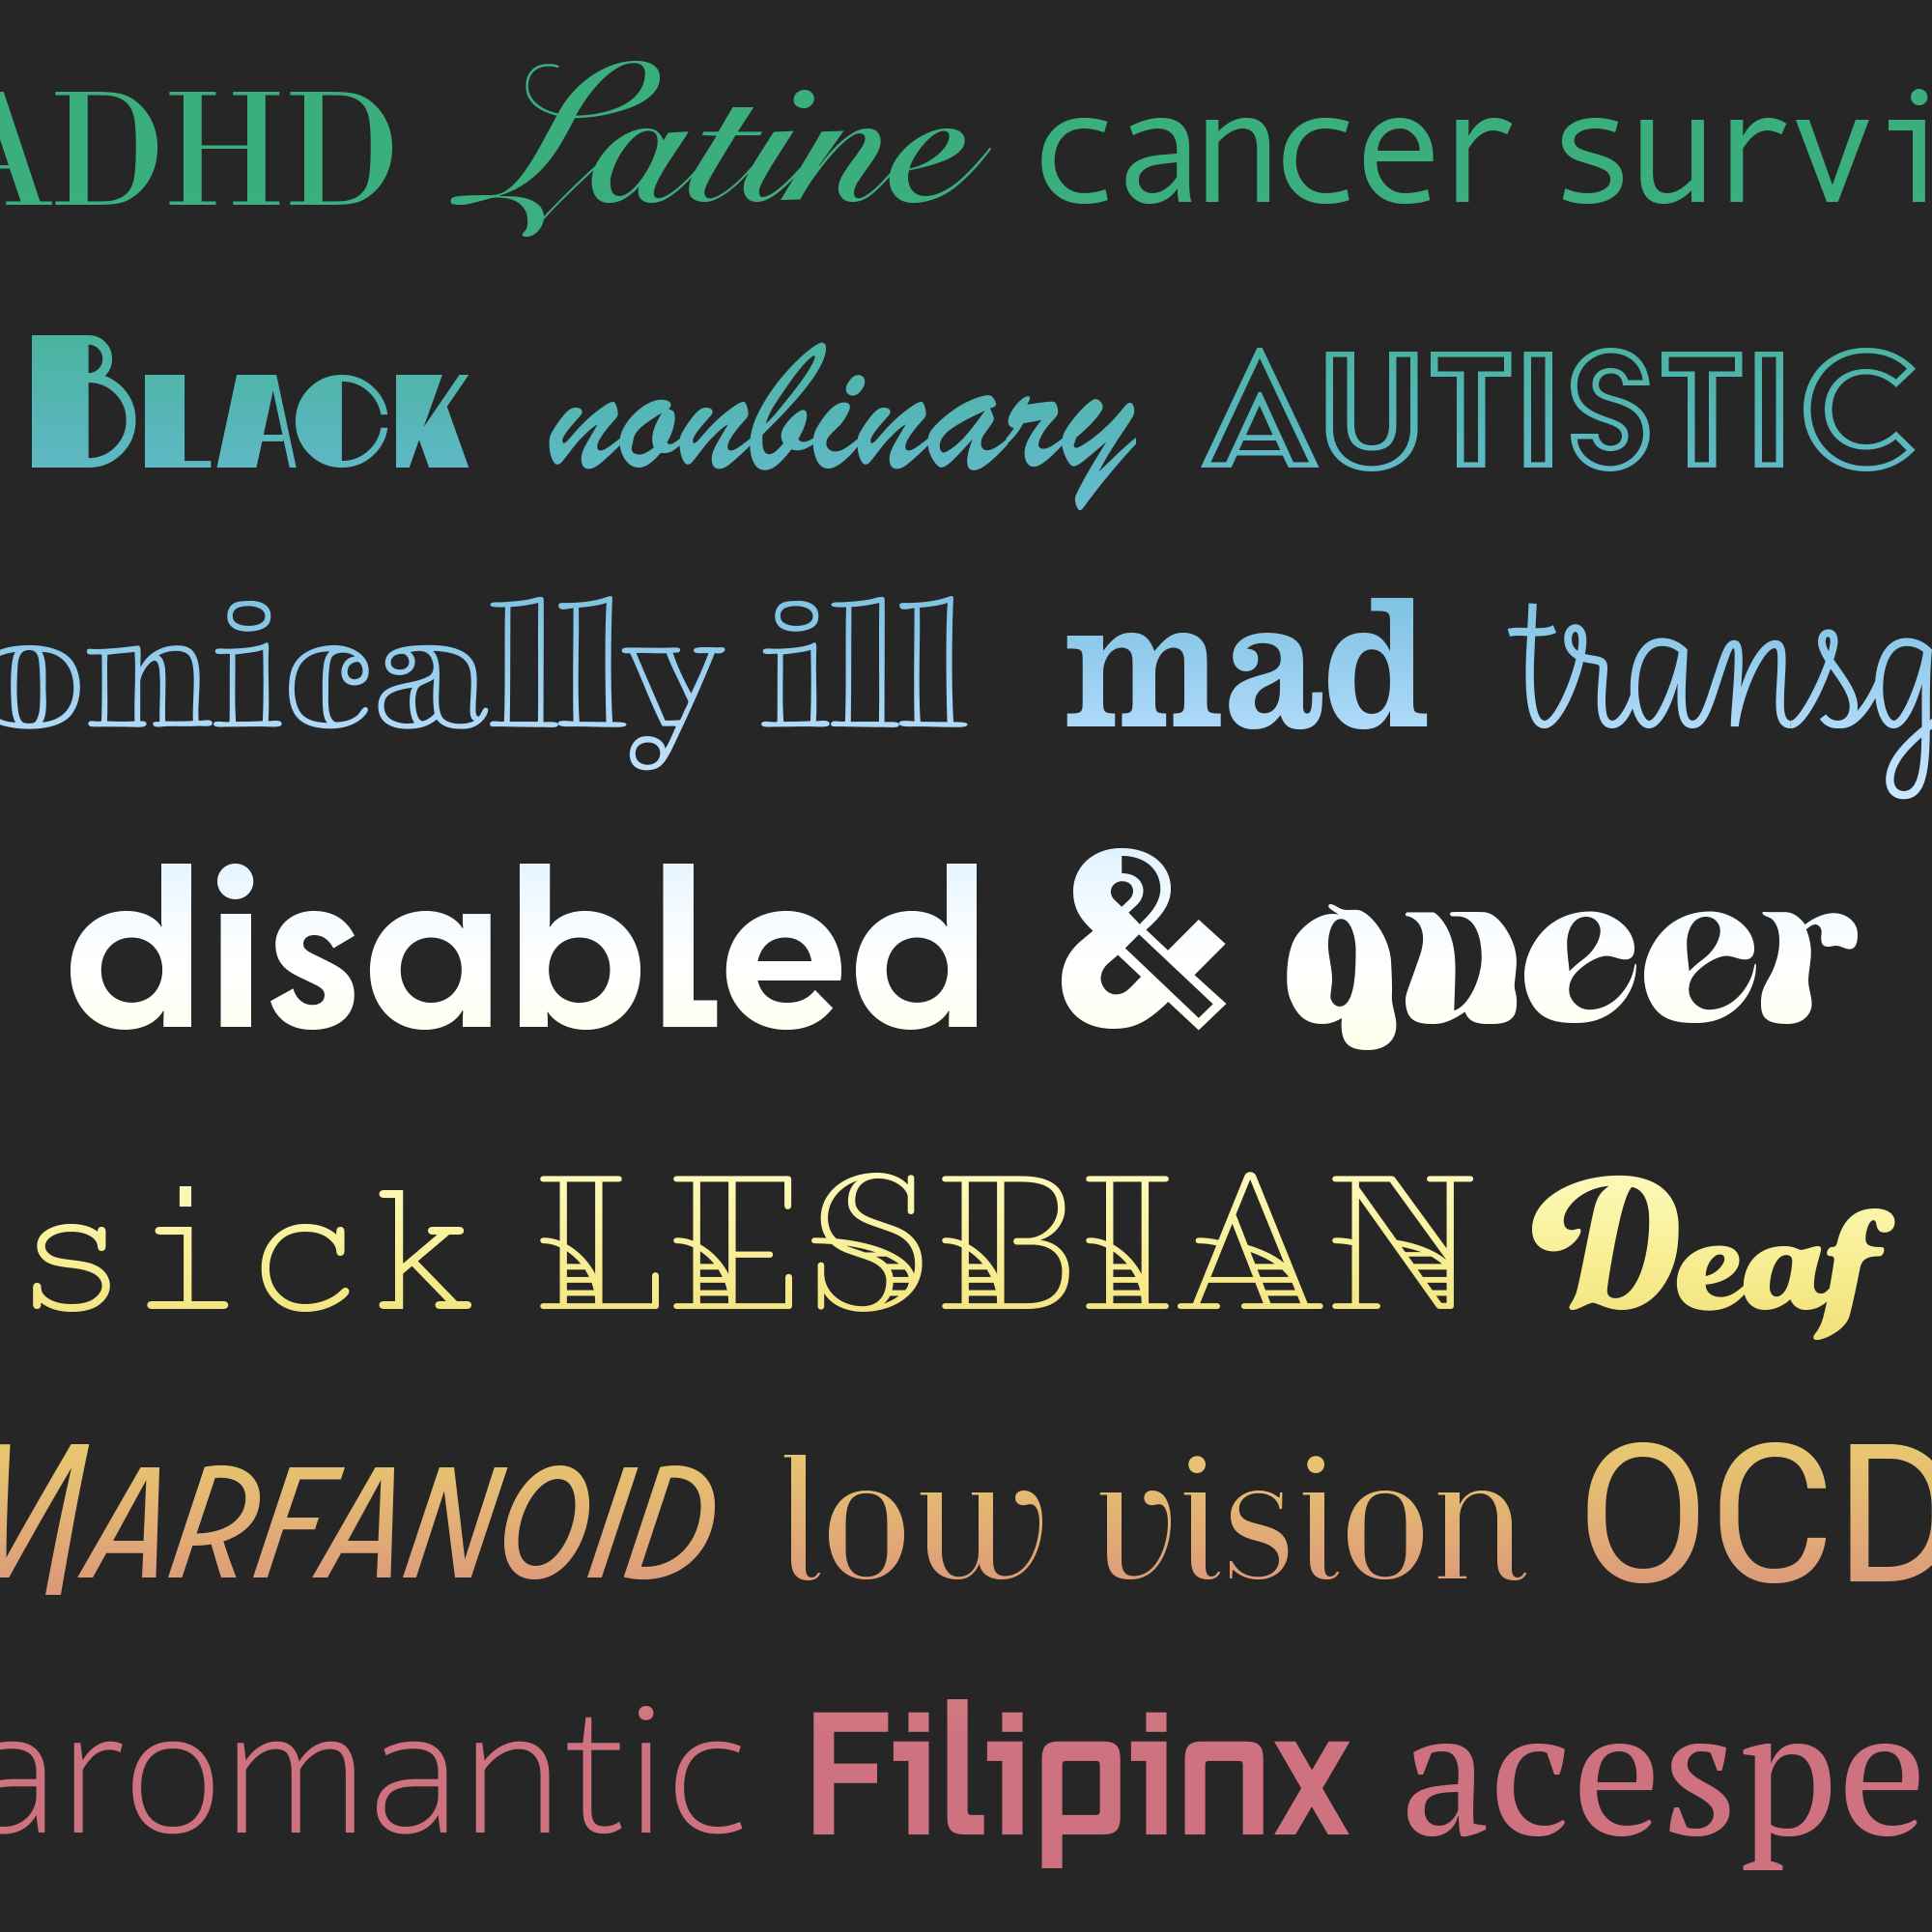 Collage of words colored by a disability pride flag gradient on an almost black background. The words cluster around “disabled & queer” and include ADHD, Latine, cancer survivor, Black, nonbinary, autistic, chronically ill, mad, transgender, sick, lesbian, Deaf, Marfanoid, low vision, OCD, aromantic, Filipinx, acespec